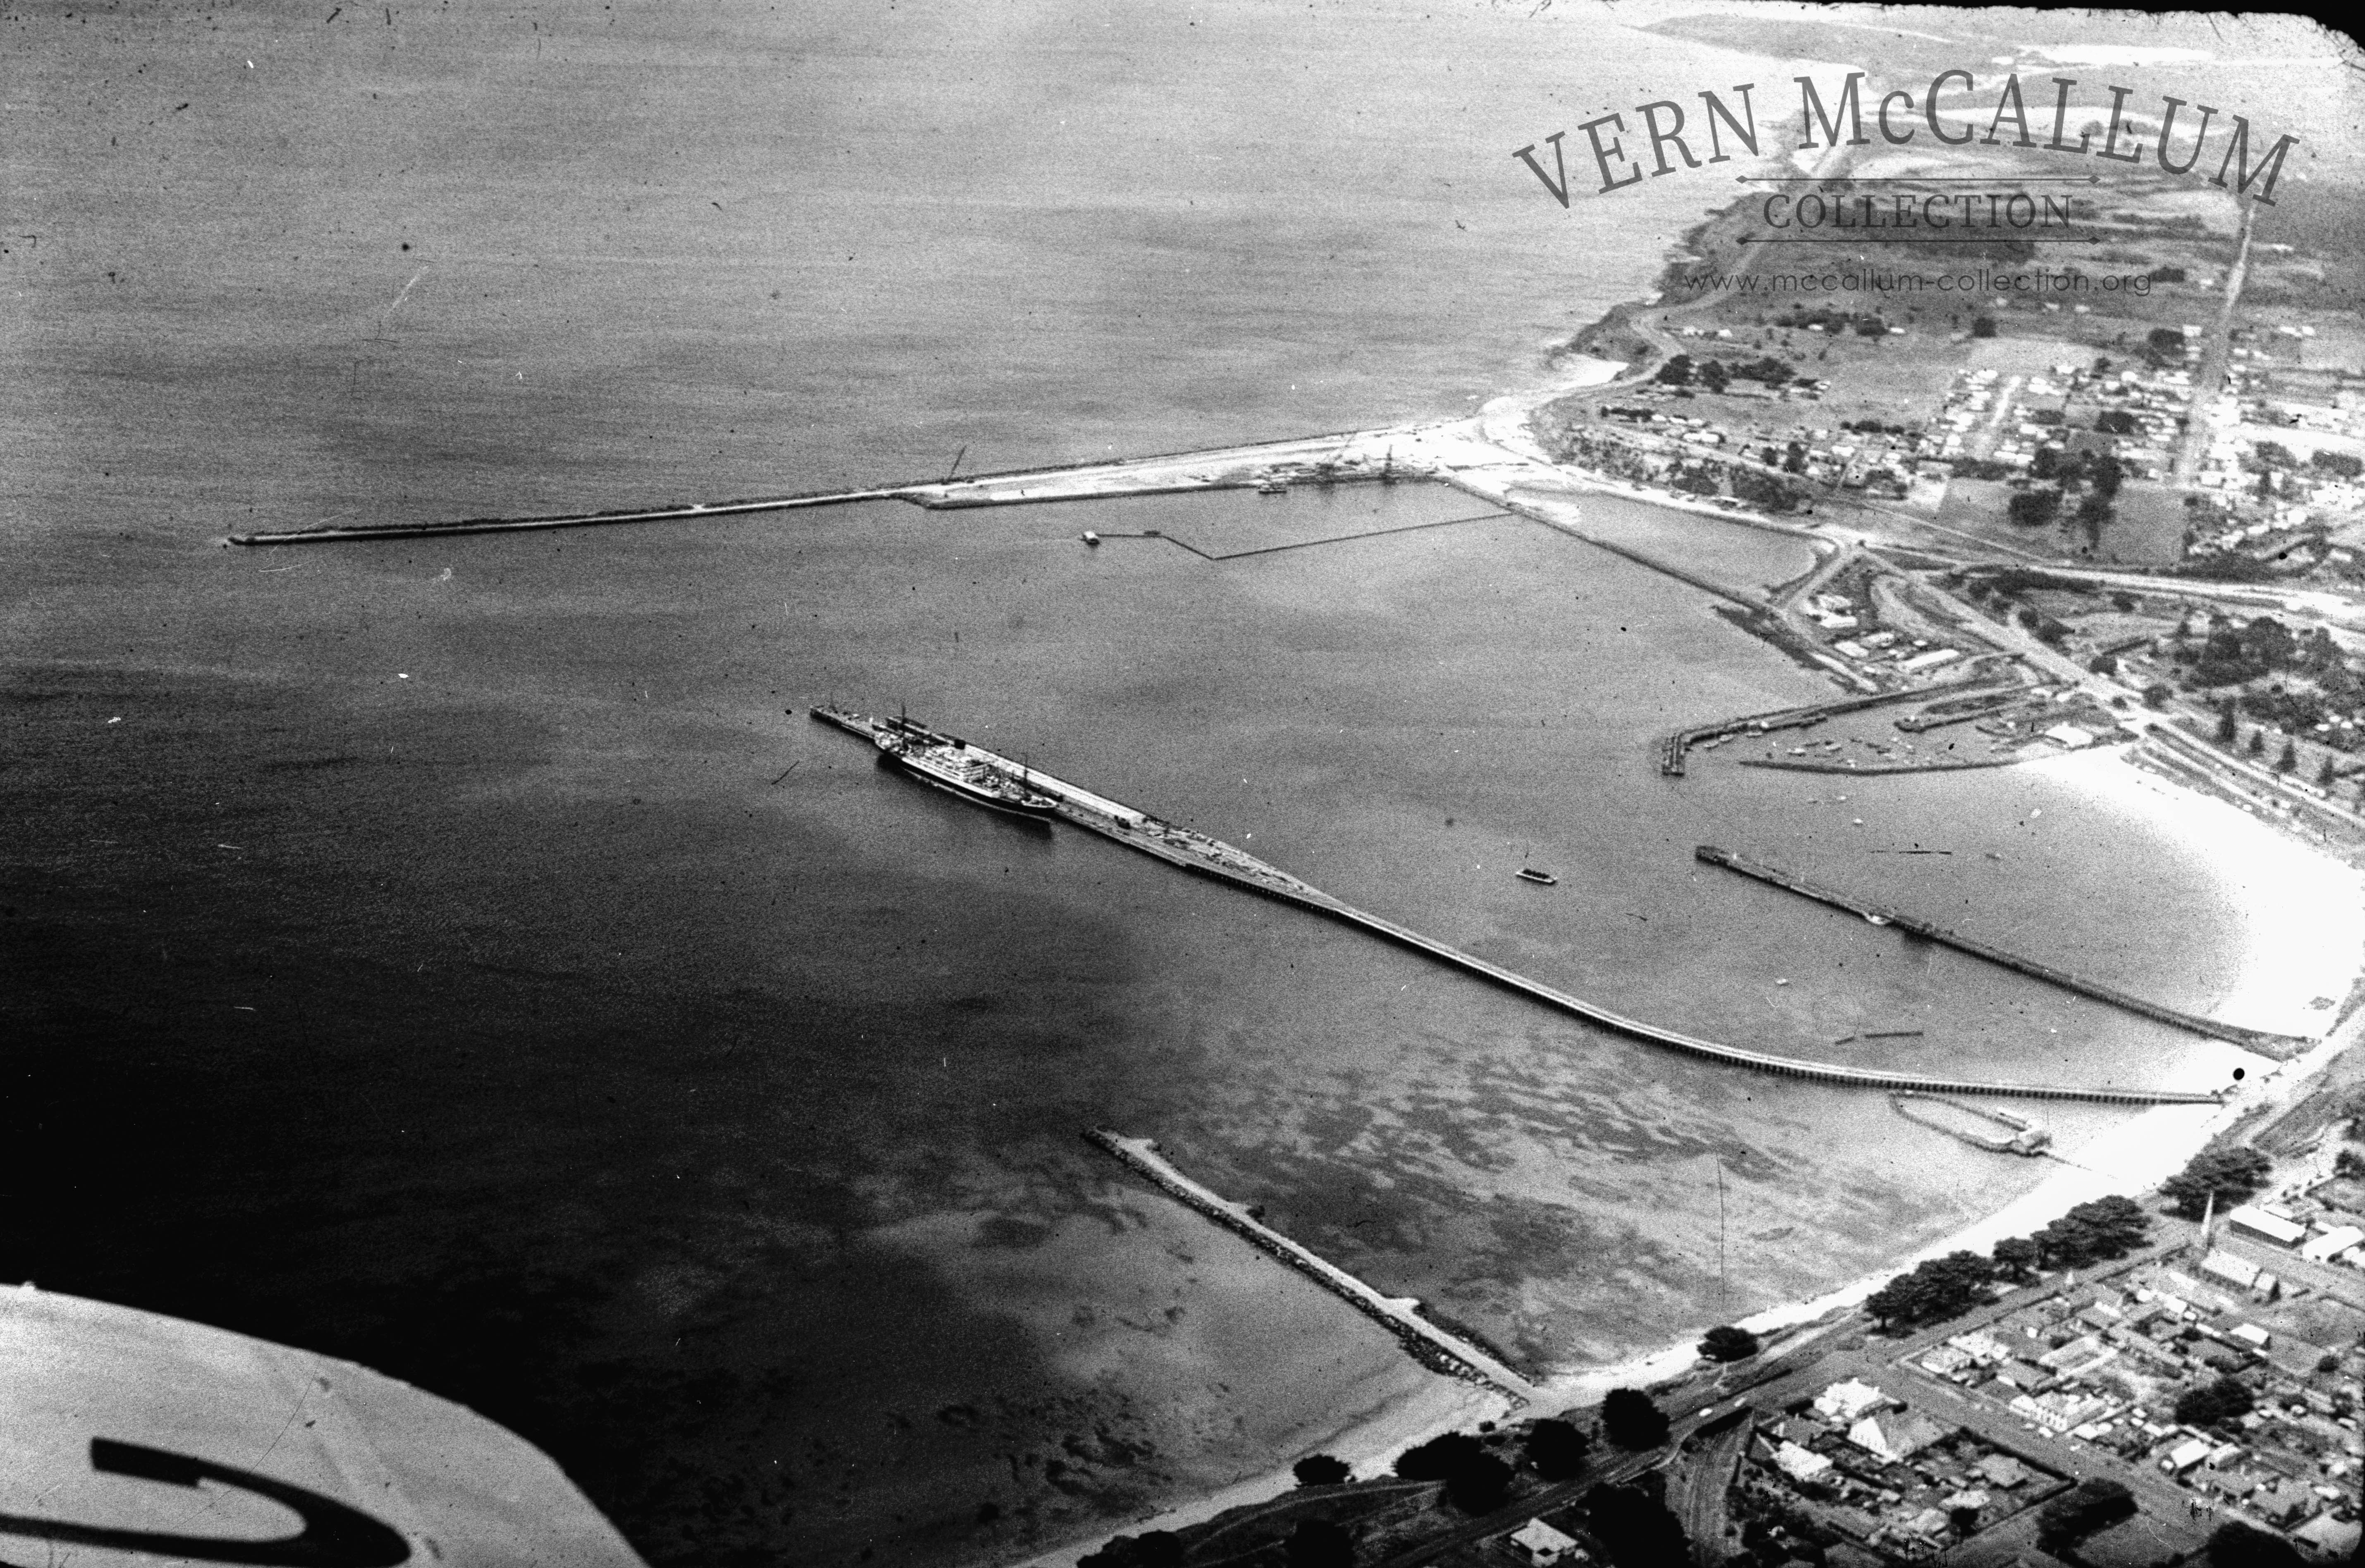 An aerial photo of the Portland harbour circa 1950.
From a glass negative.